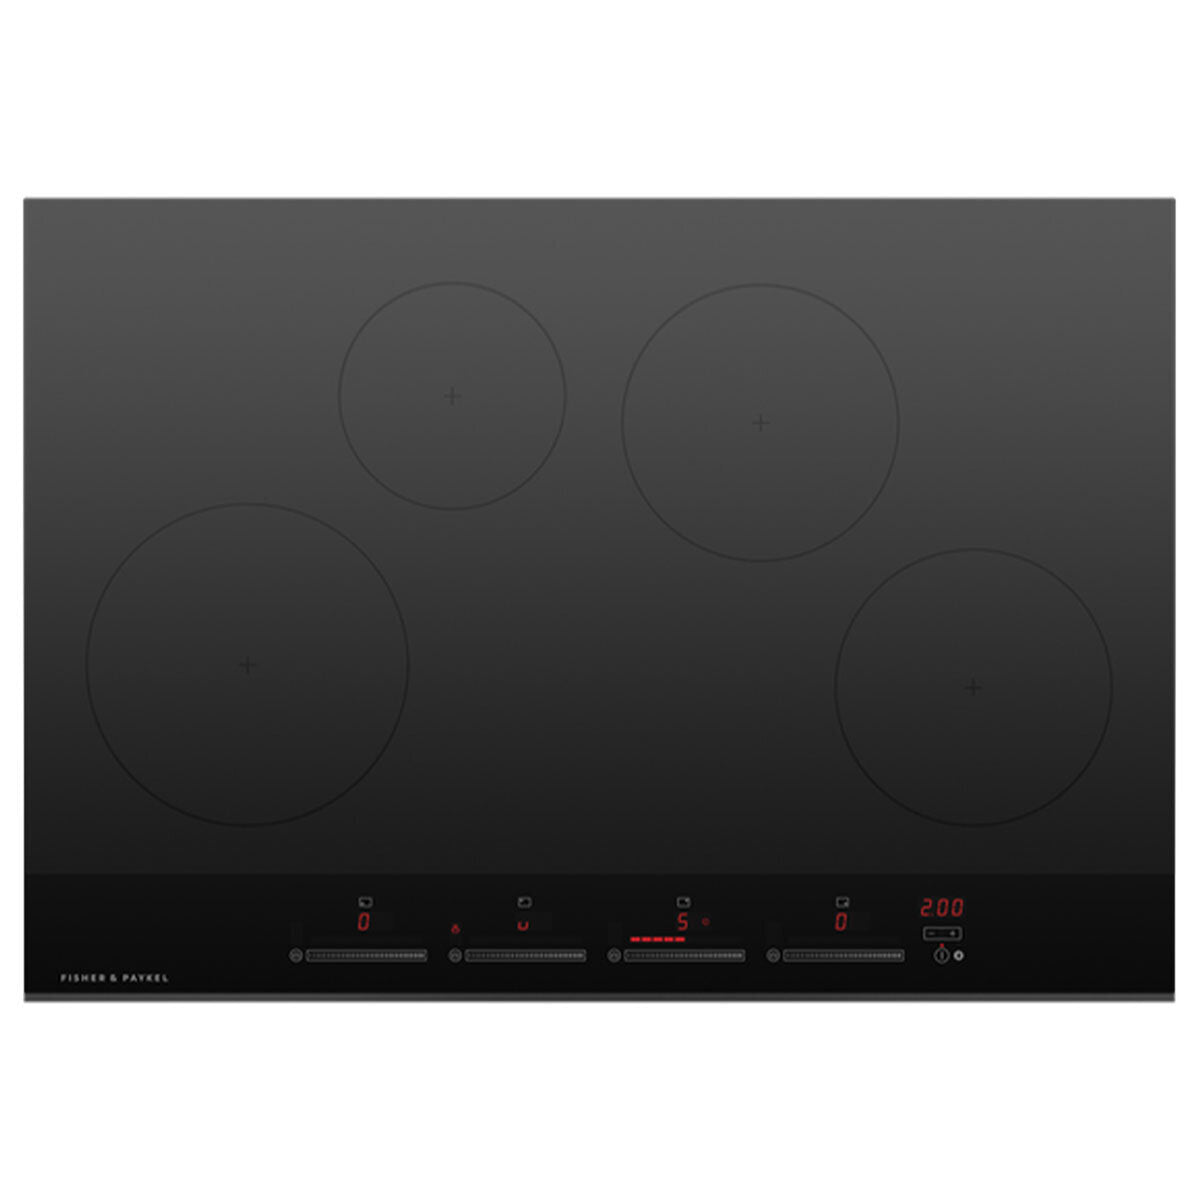 CARTON DAMAGED/FACTORY SECOND FISHER & PAYKEL 76CM INDUCTION COOKTOP - BLACK GLASS CI764DTB4 - Second Hand Appliances Geebung